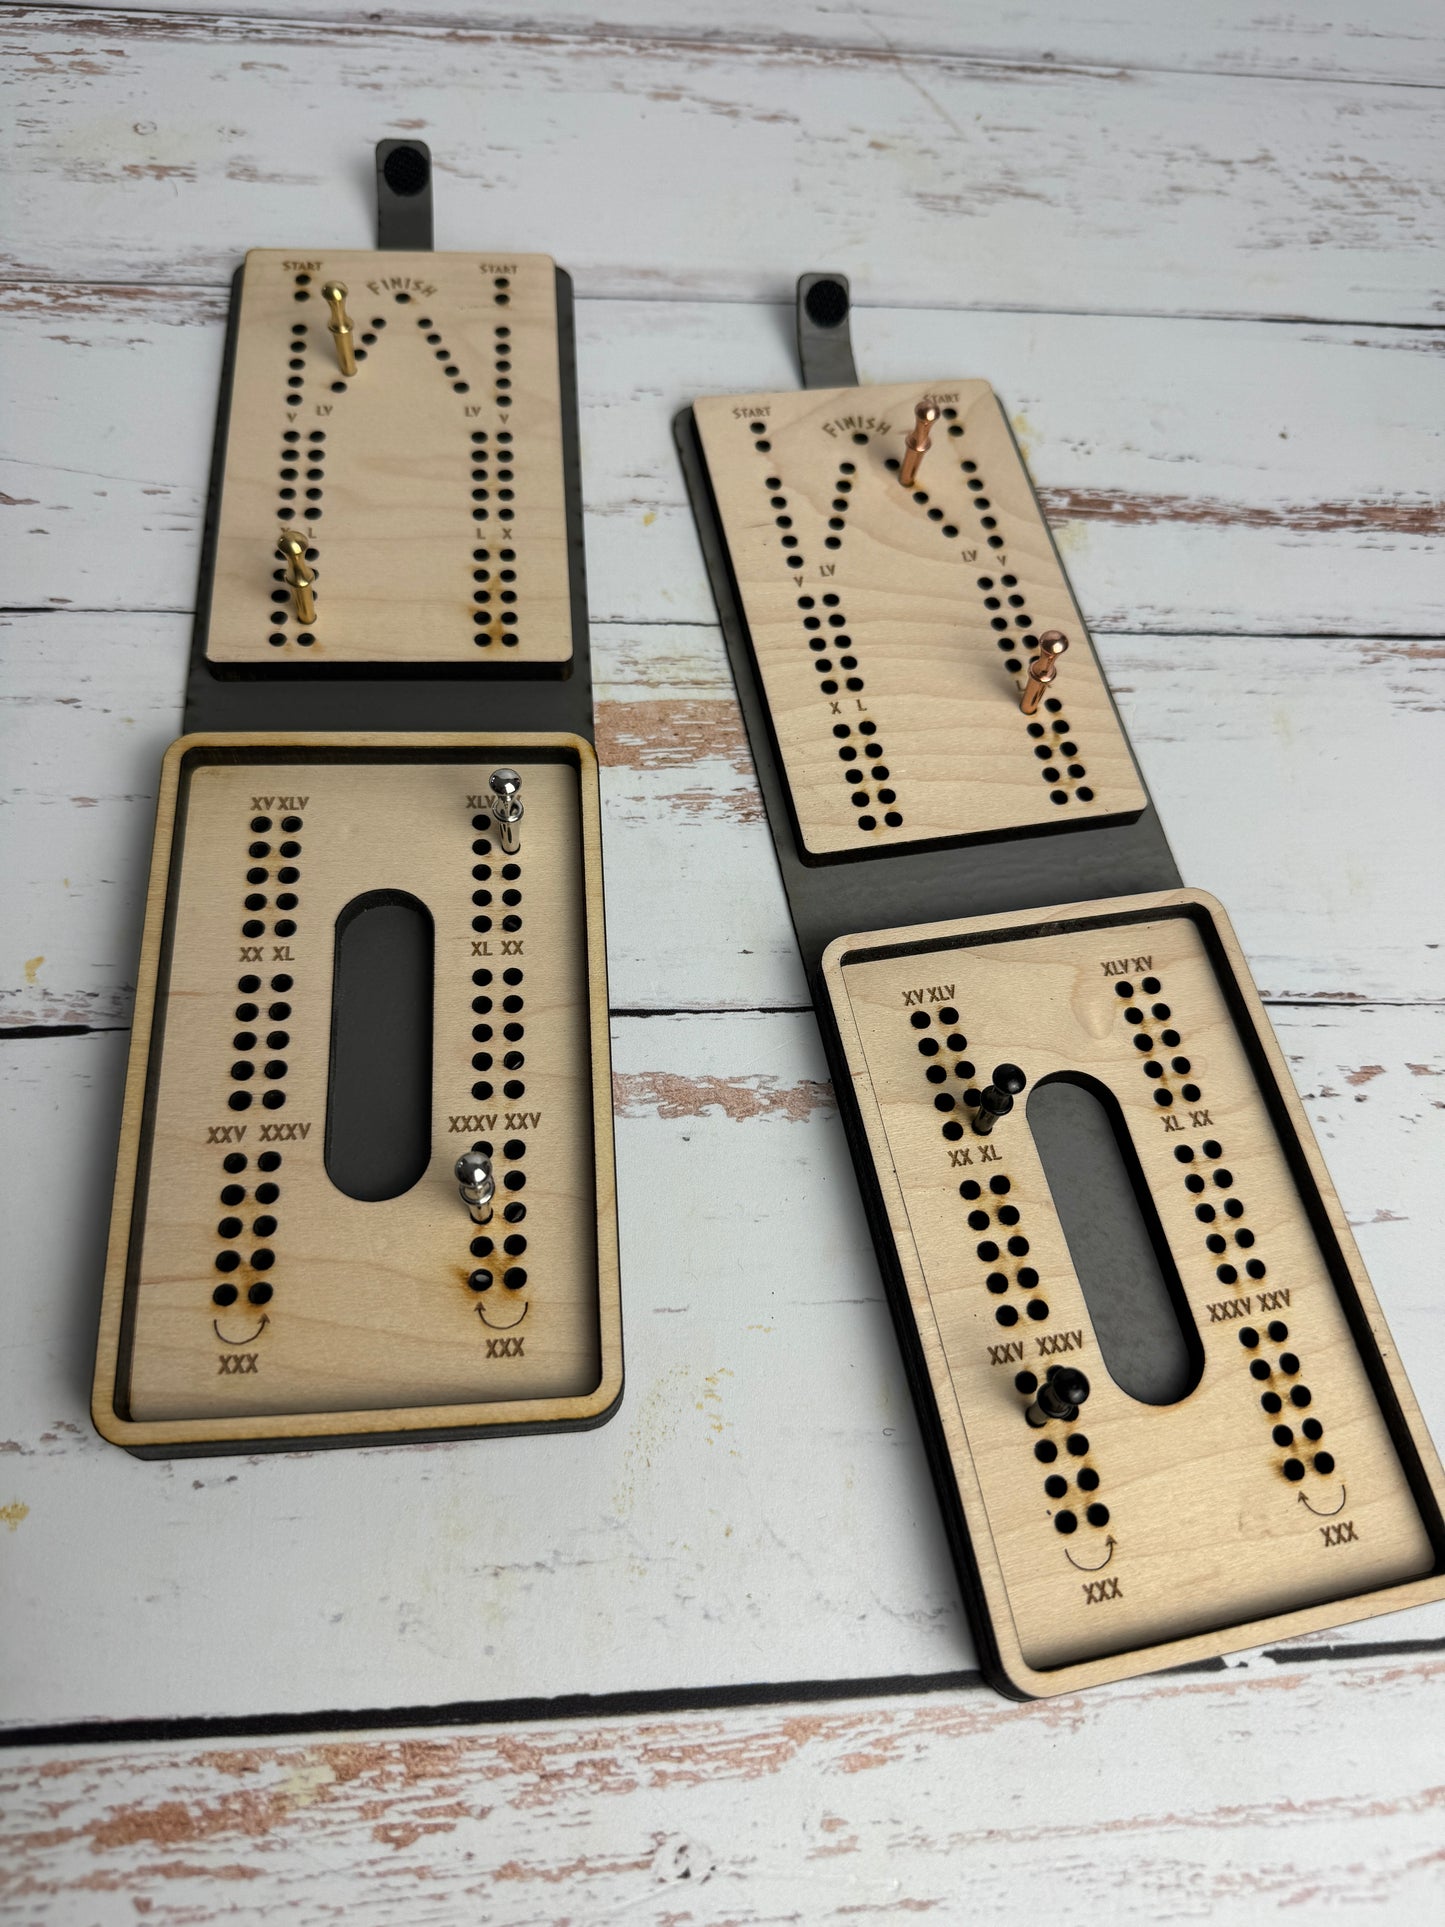 Folding Cribbage Board - Love to Fly